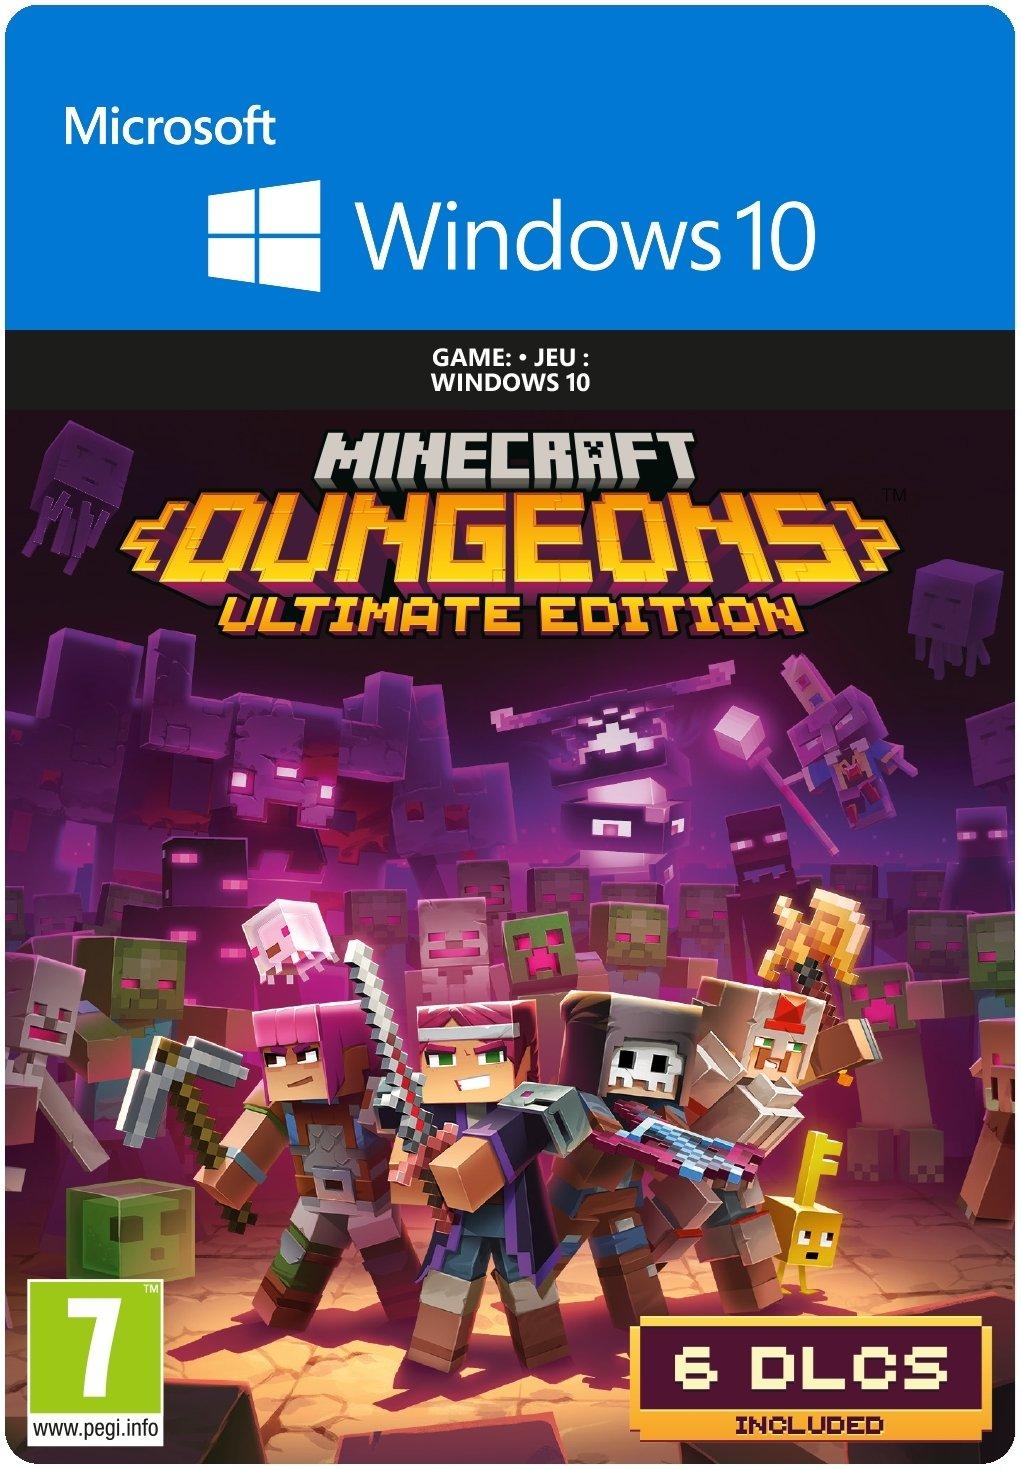 Minecraft Dungeons: Ultimate Edition - Win10 - Game | 2WU-00037 (7b31f949-bc40-8a47-9b1c-e8a8cdaa0453)